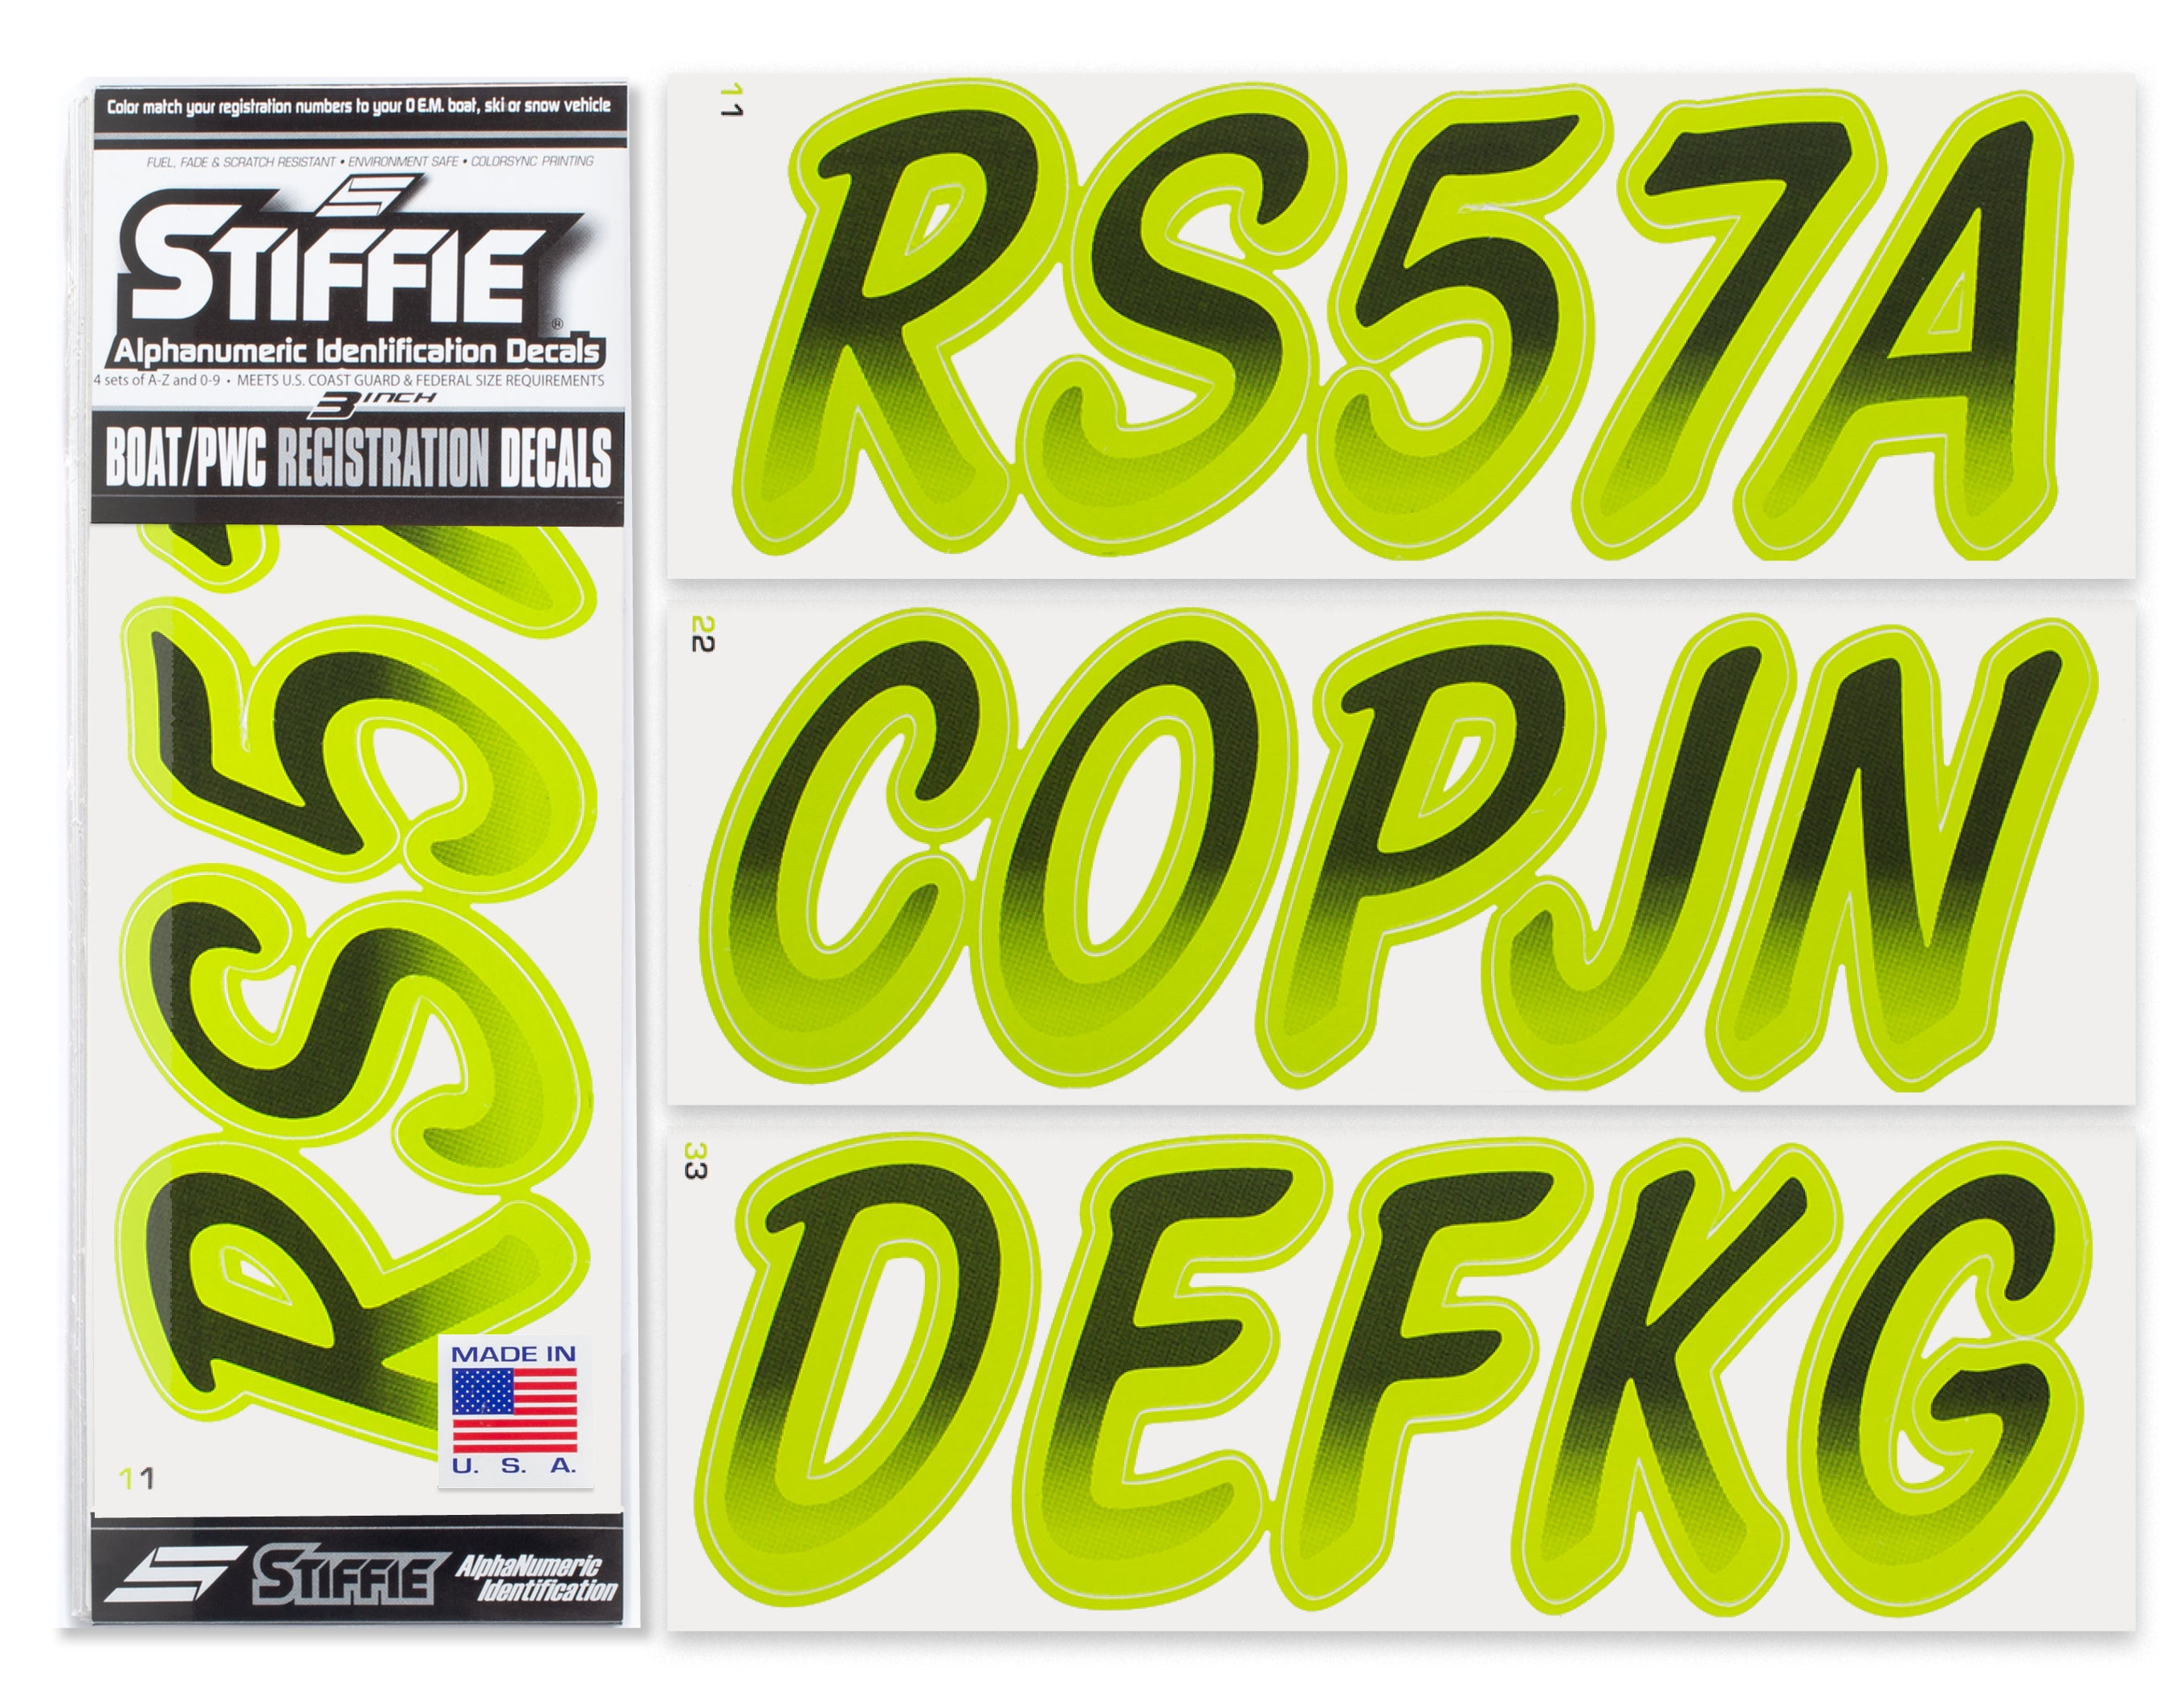 STIFFIE Whipline Black/Atomic Green 3" Alpha-Numeric Registration Identification Numbers Stickers Decals for Boats & Personal Watercraft